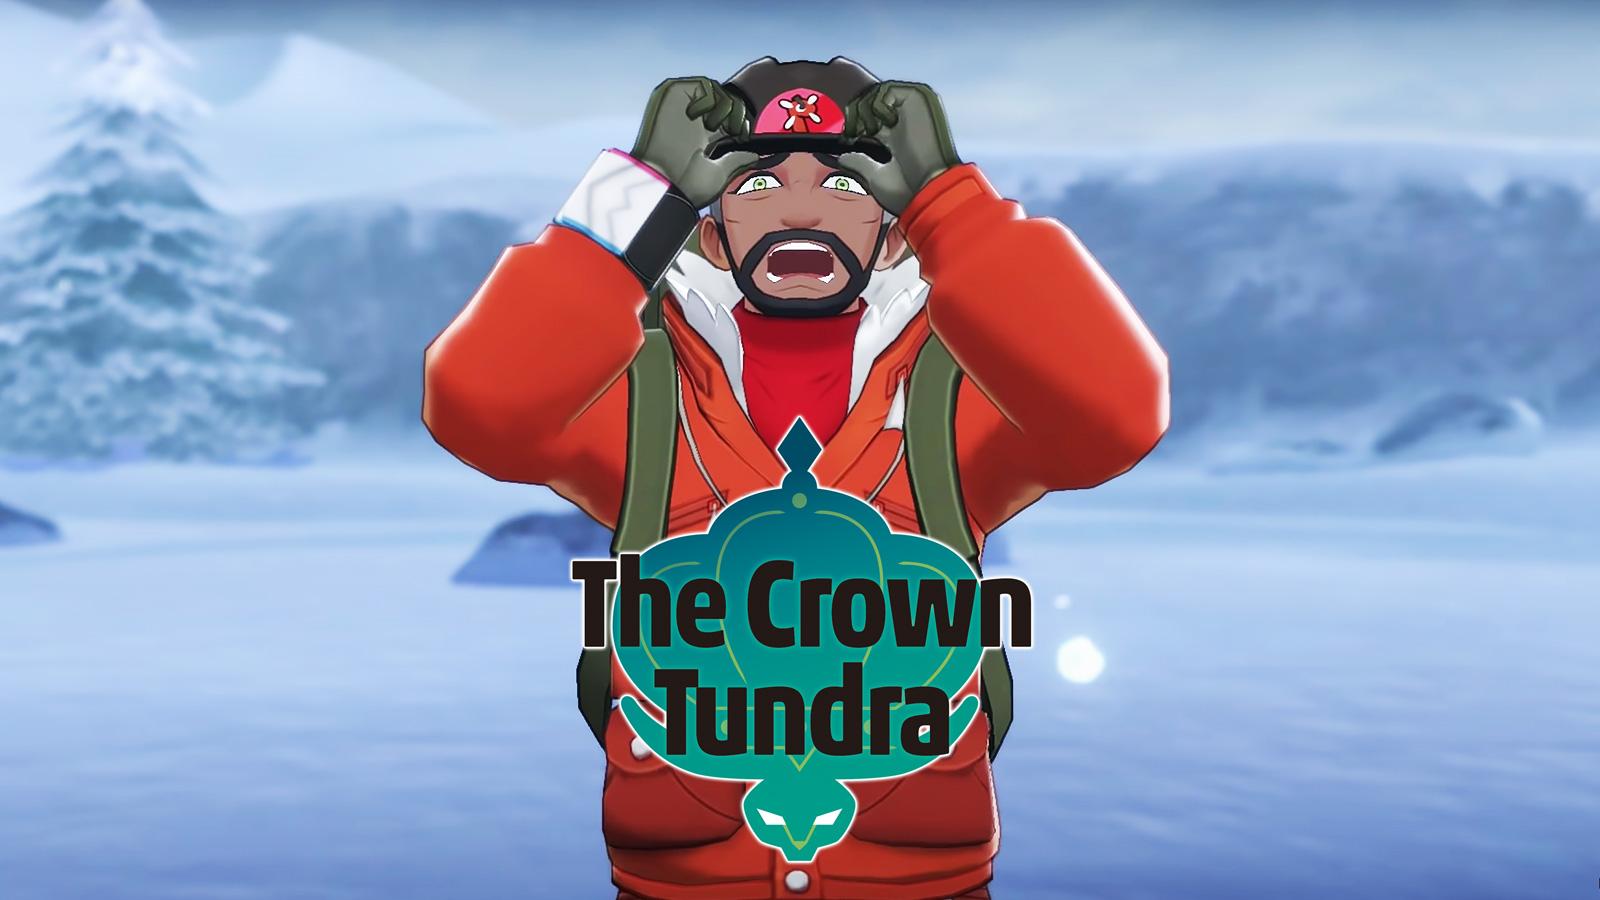 Pokémon Sword and Shield: The Crown Tundra review – a light